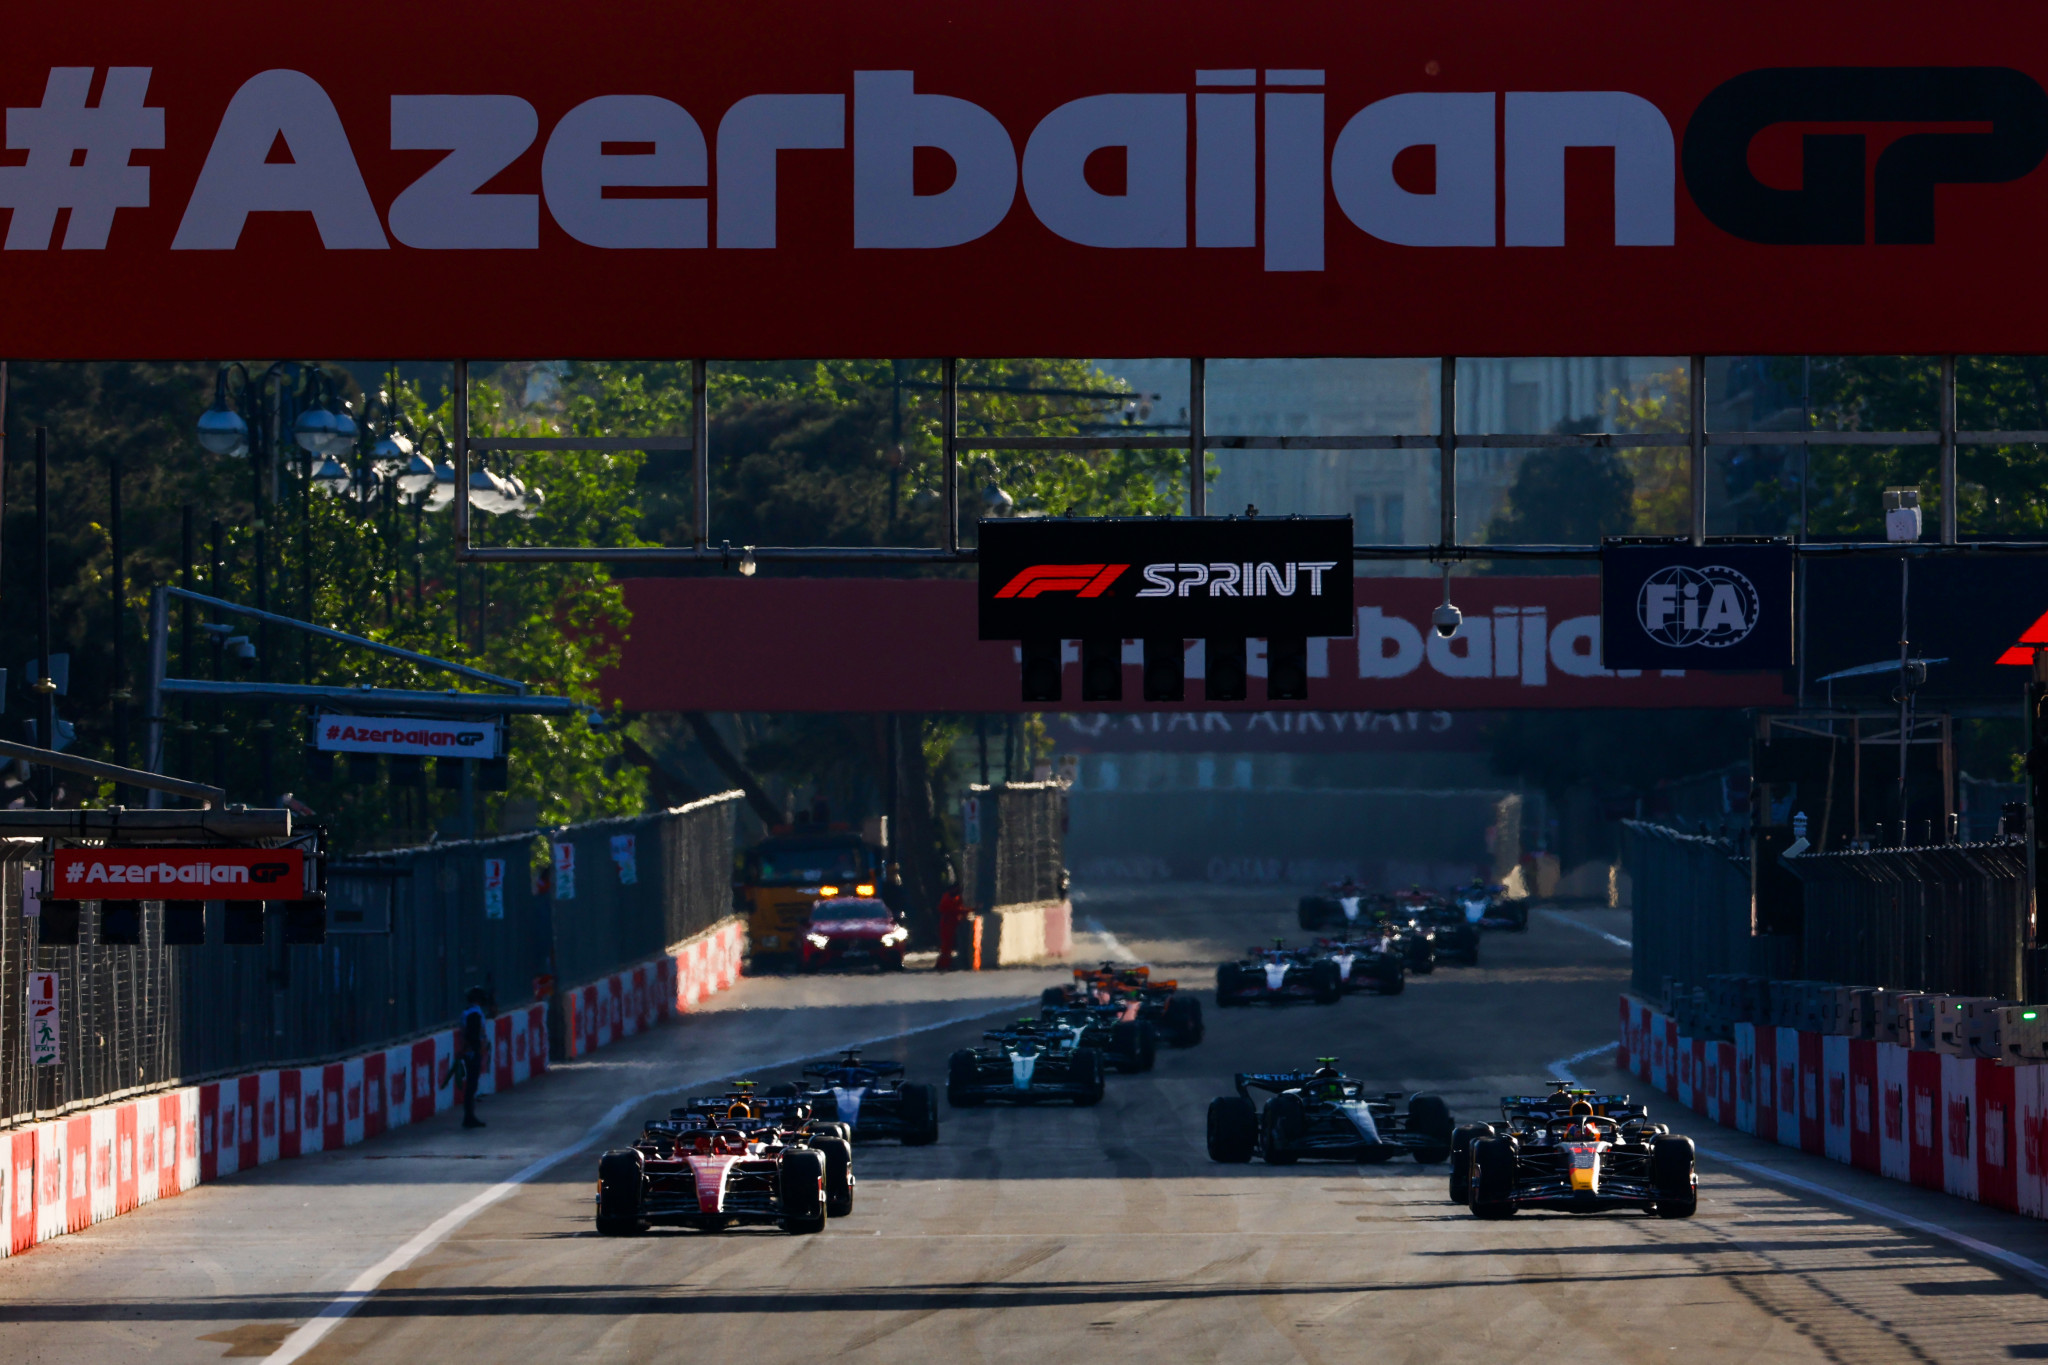 insidethegames is reporting LIVE from the Azerbaijan Grand Prix